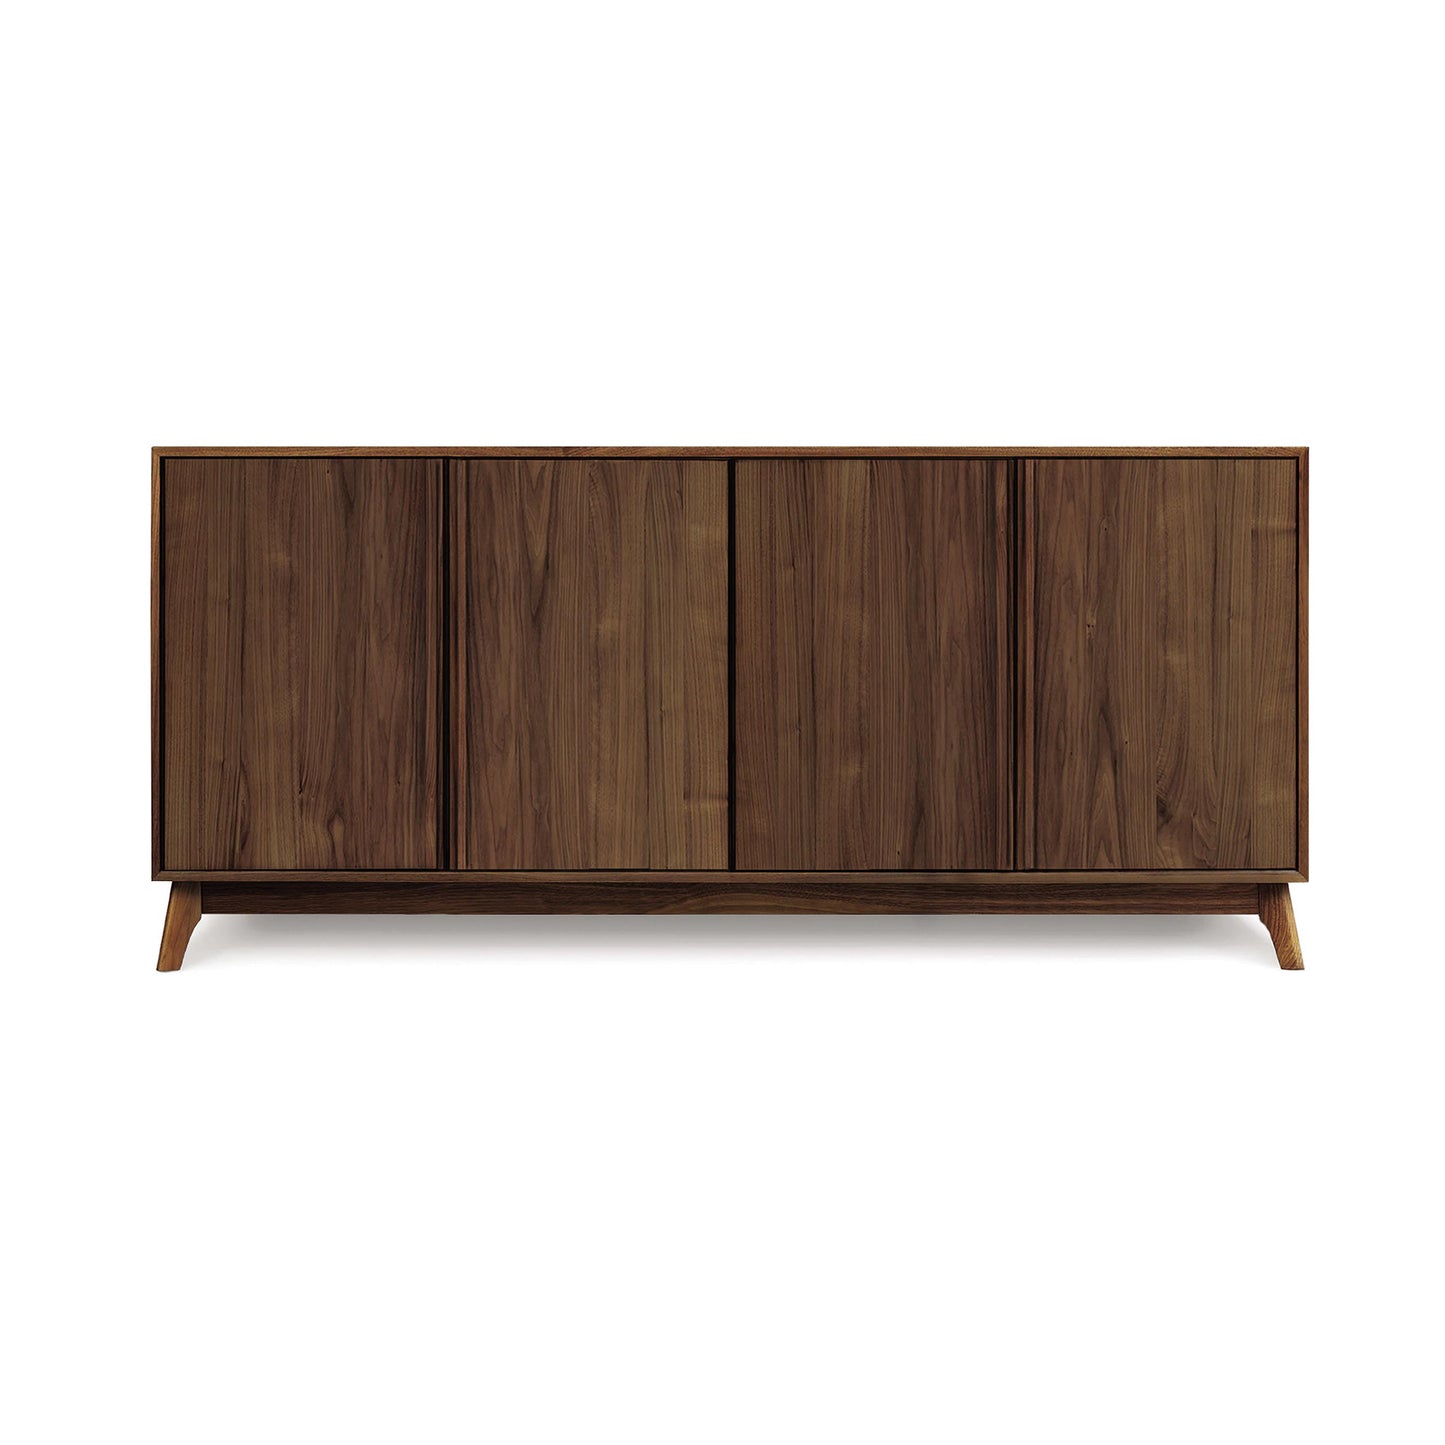 A modern Catalina 4-Door Buffet by Copeland Furniture with closed doors, standing against an isolated background.